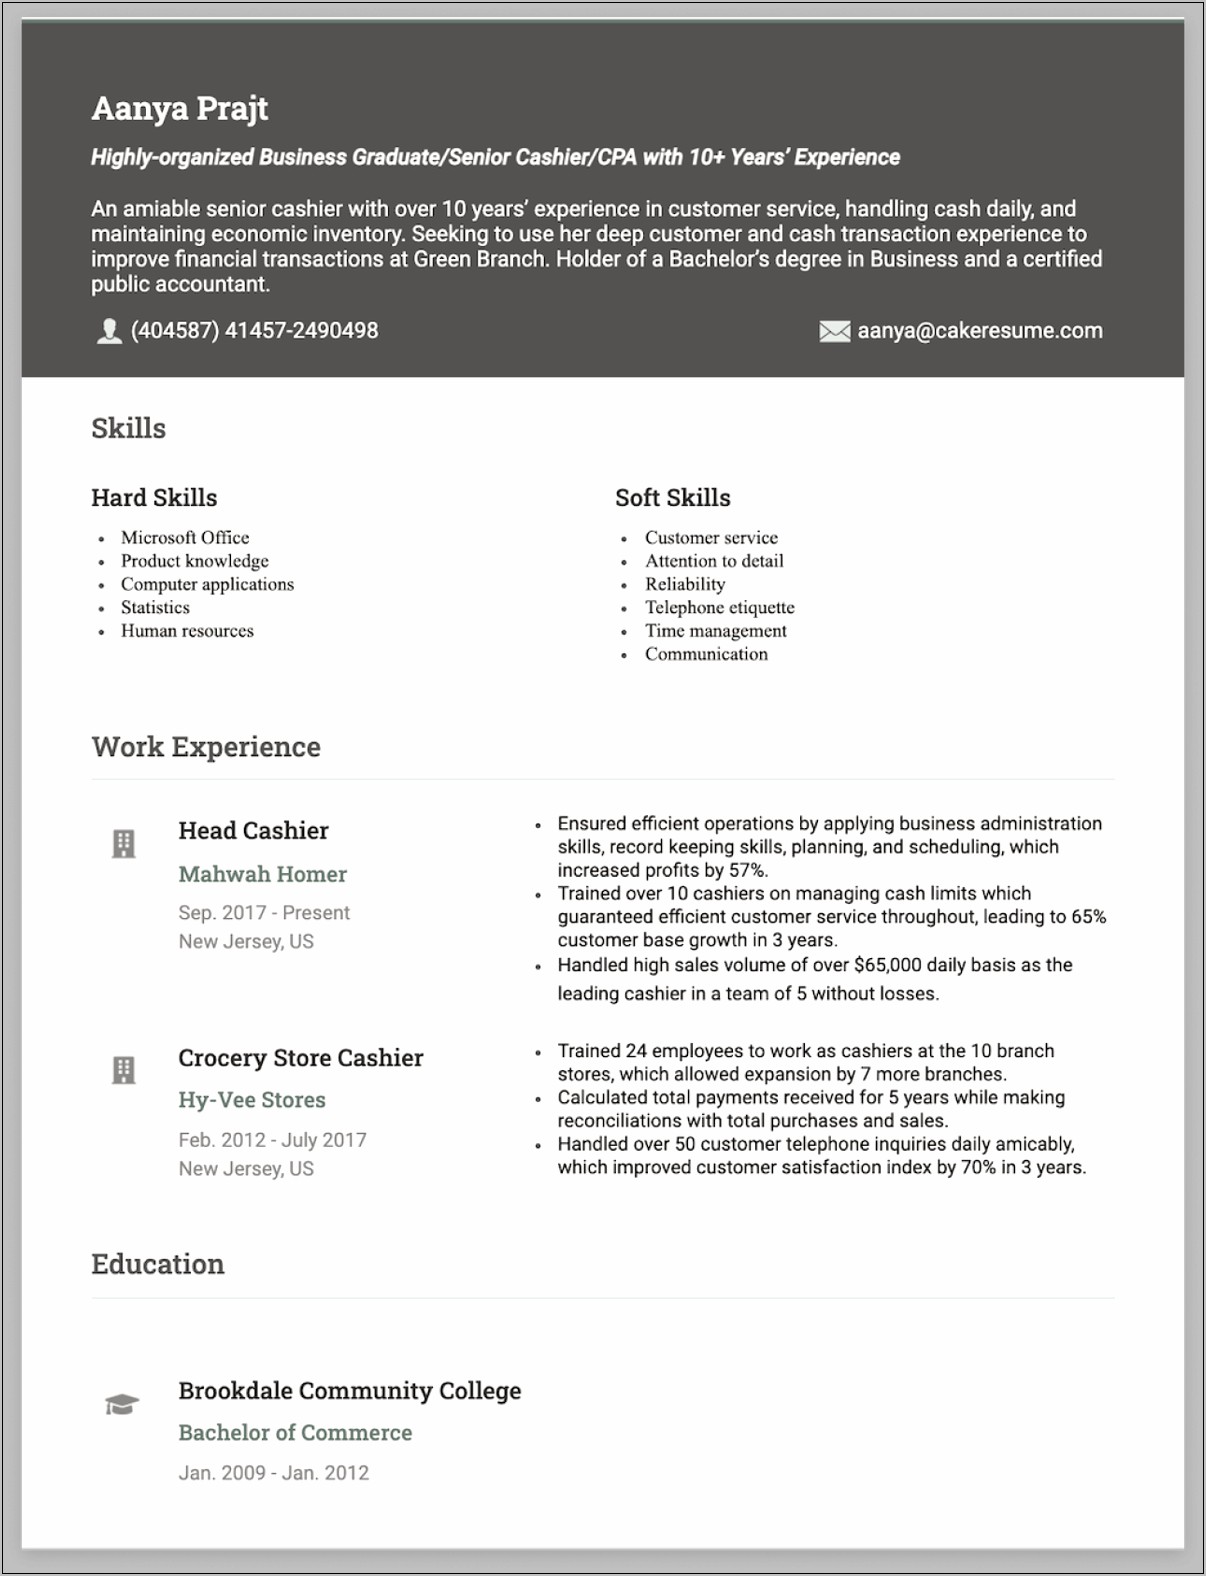 Public Service Resume Objective Examples